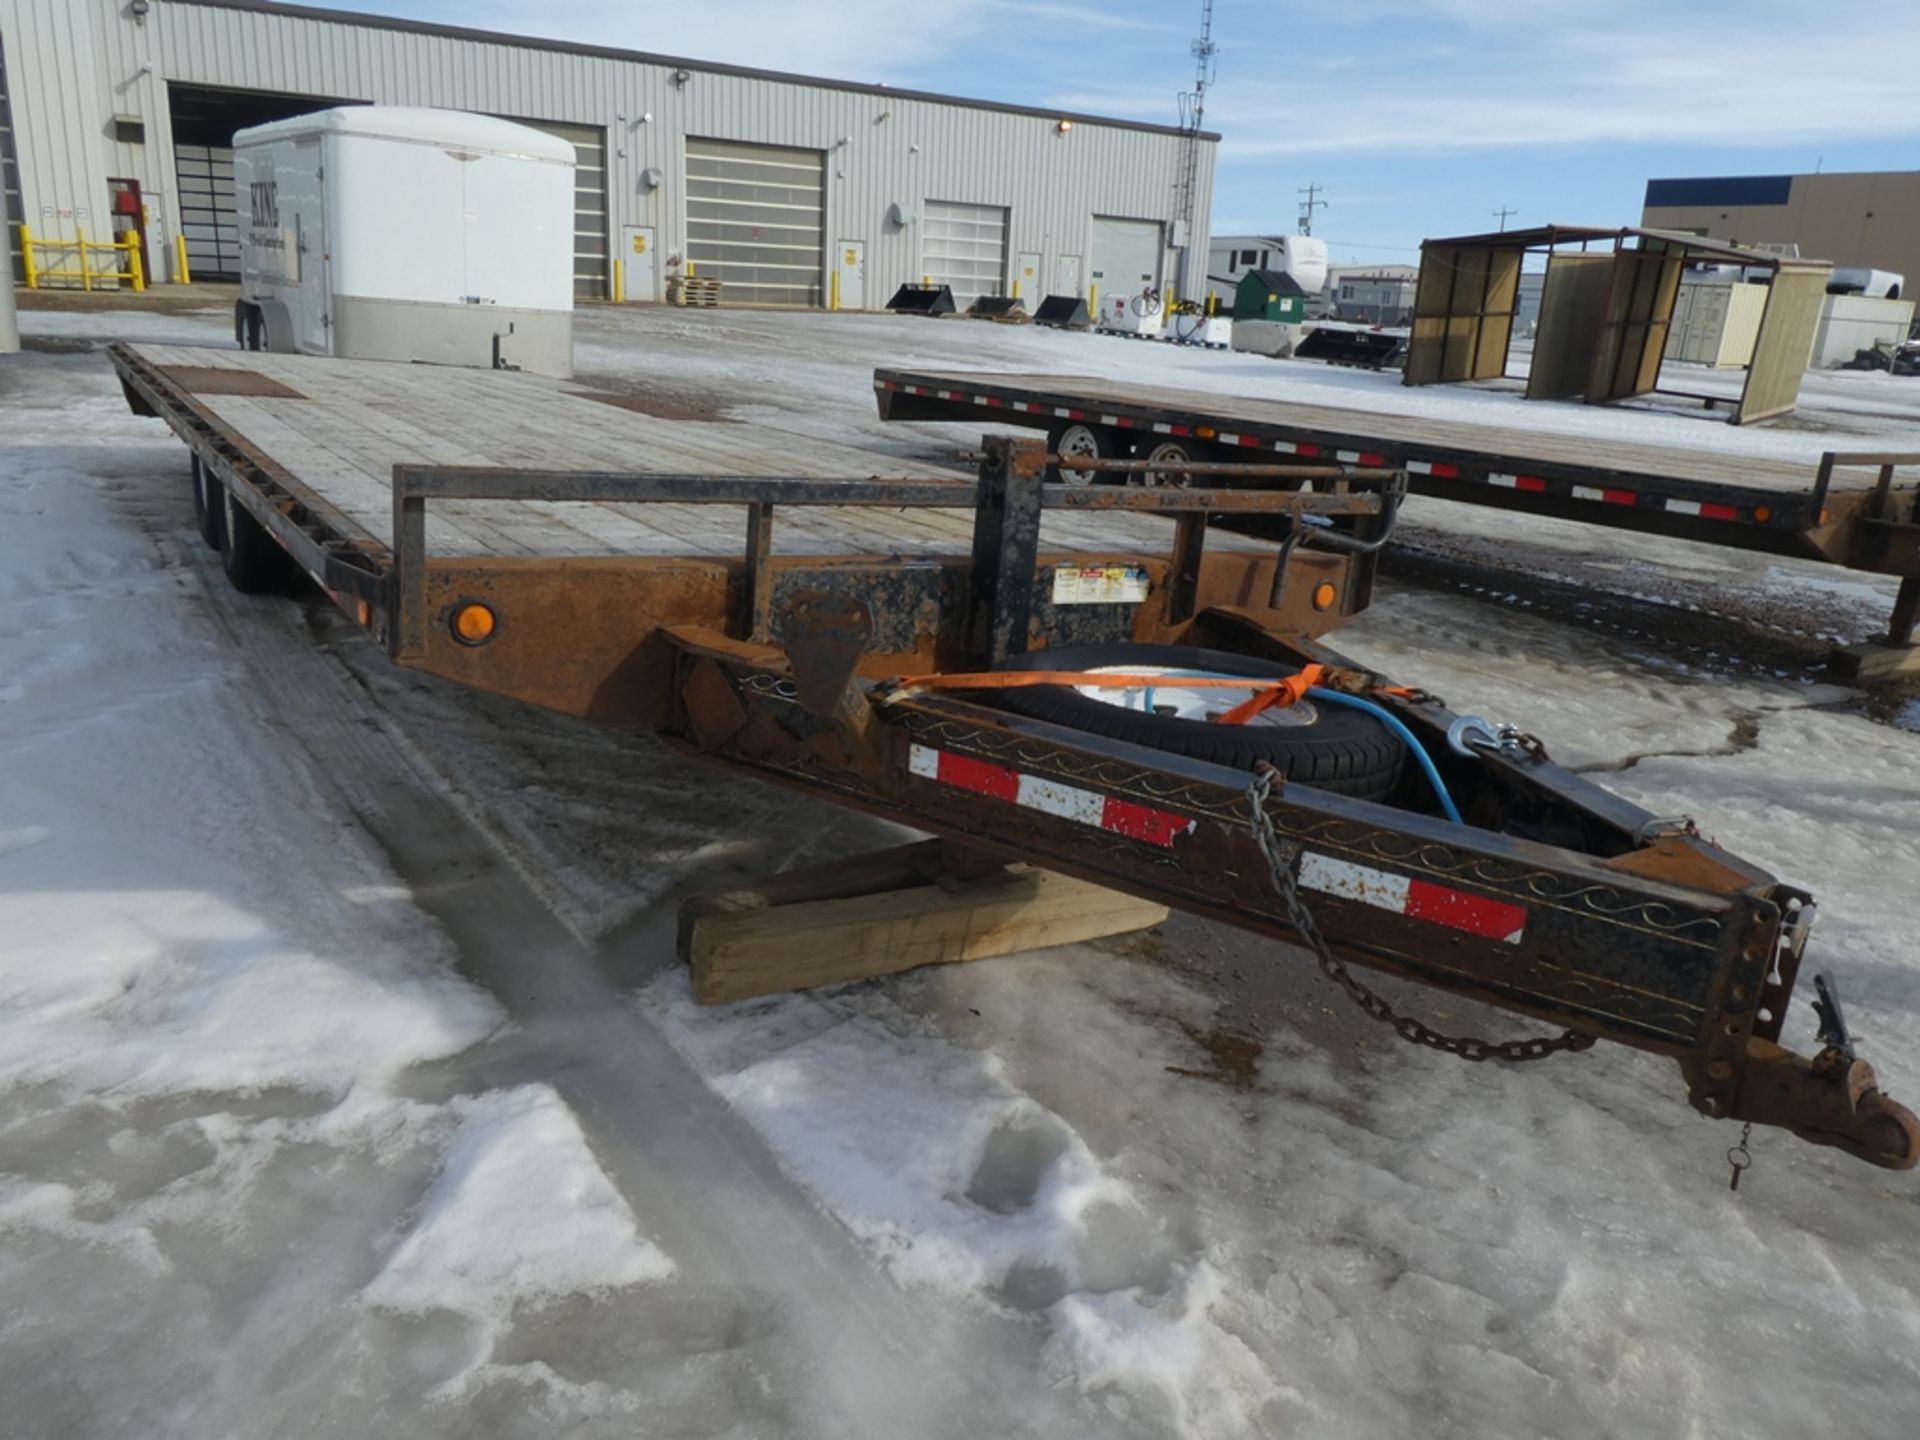 2013 PJ T/A 14000LB DECK-OVER EQUIPMENT TRAILERS W/RAMPS, BALL HITCH, 8'6" X 24FT - Image 4 of 6